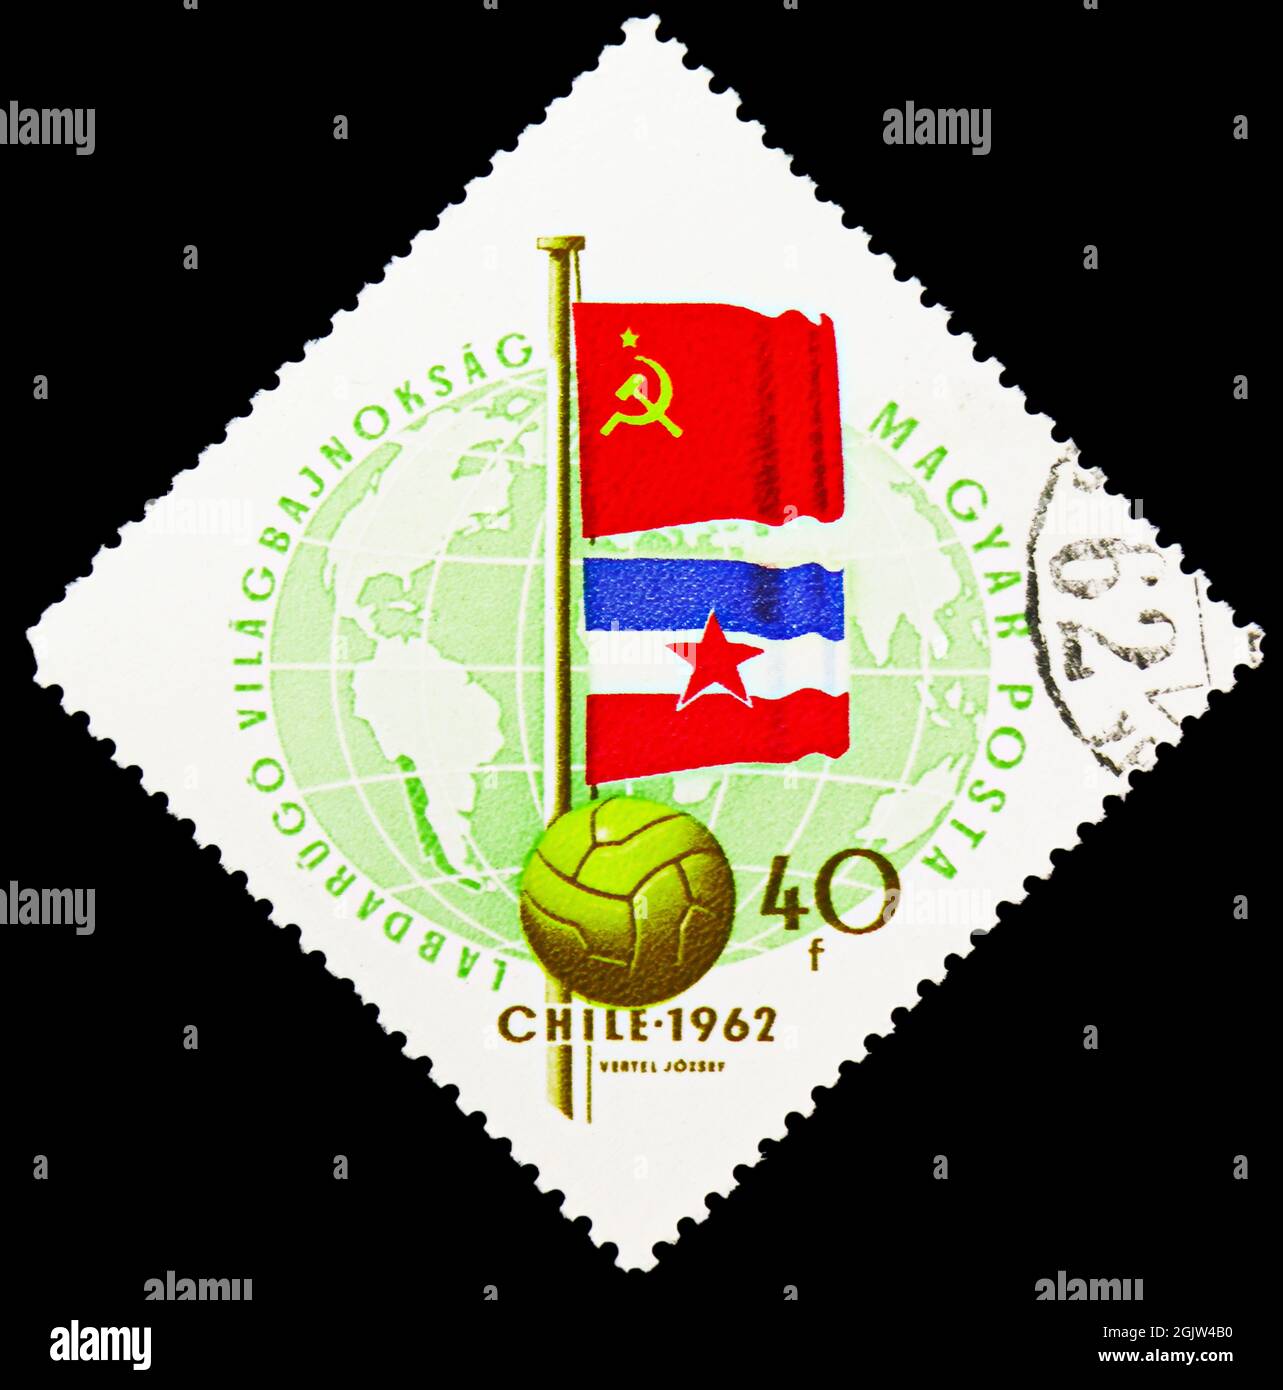 MOSCOW, RUSSIA - JUNE 20, 2021: Postage stamp printed in Hungary shows Flags of the Soviet Union and Yugoslavia, FIFA World Cup 1962 - Chile serie, ci Stock Photo